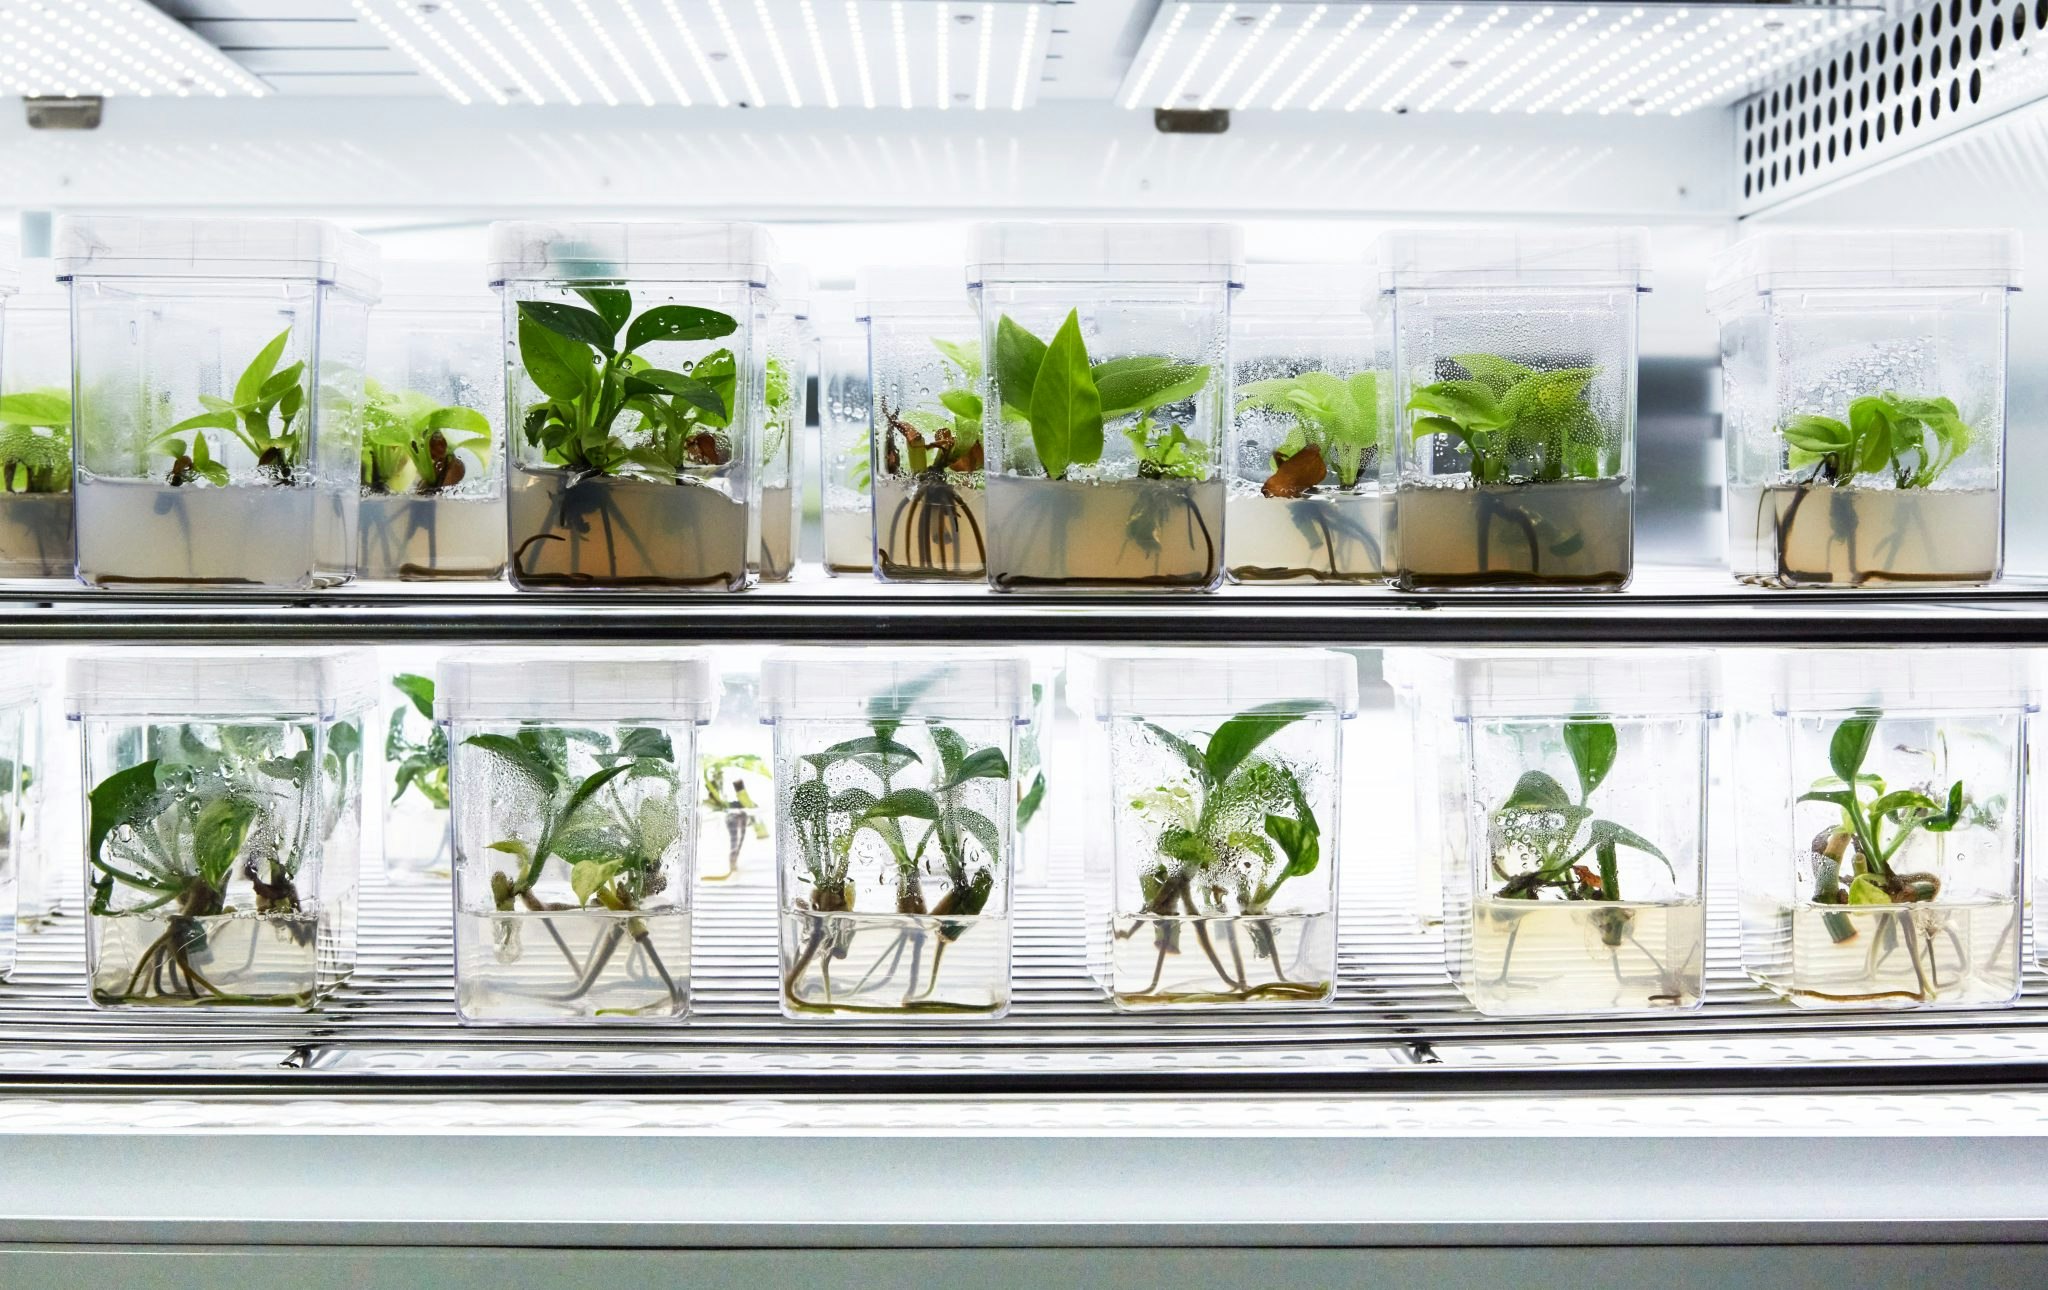 Neoplants' plants growing in the lab